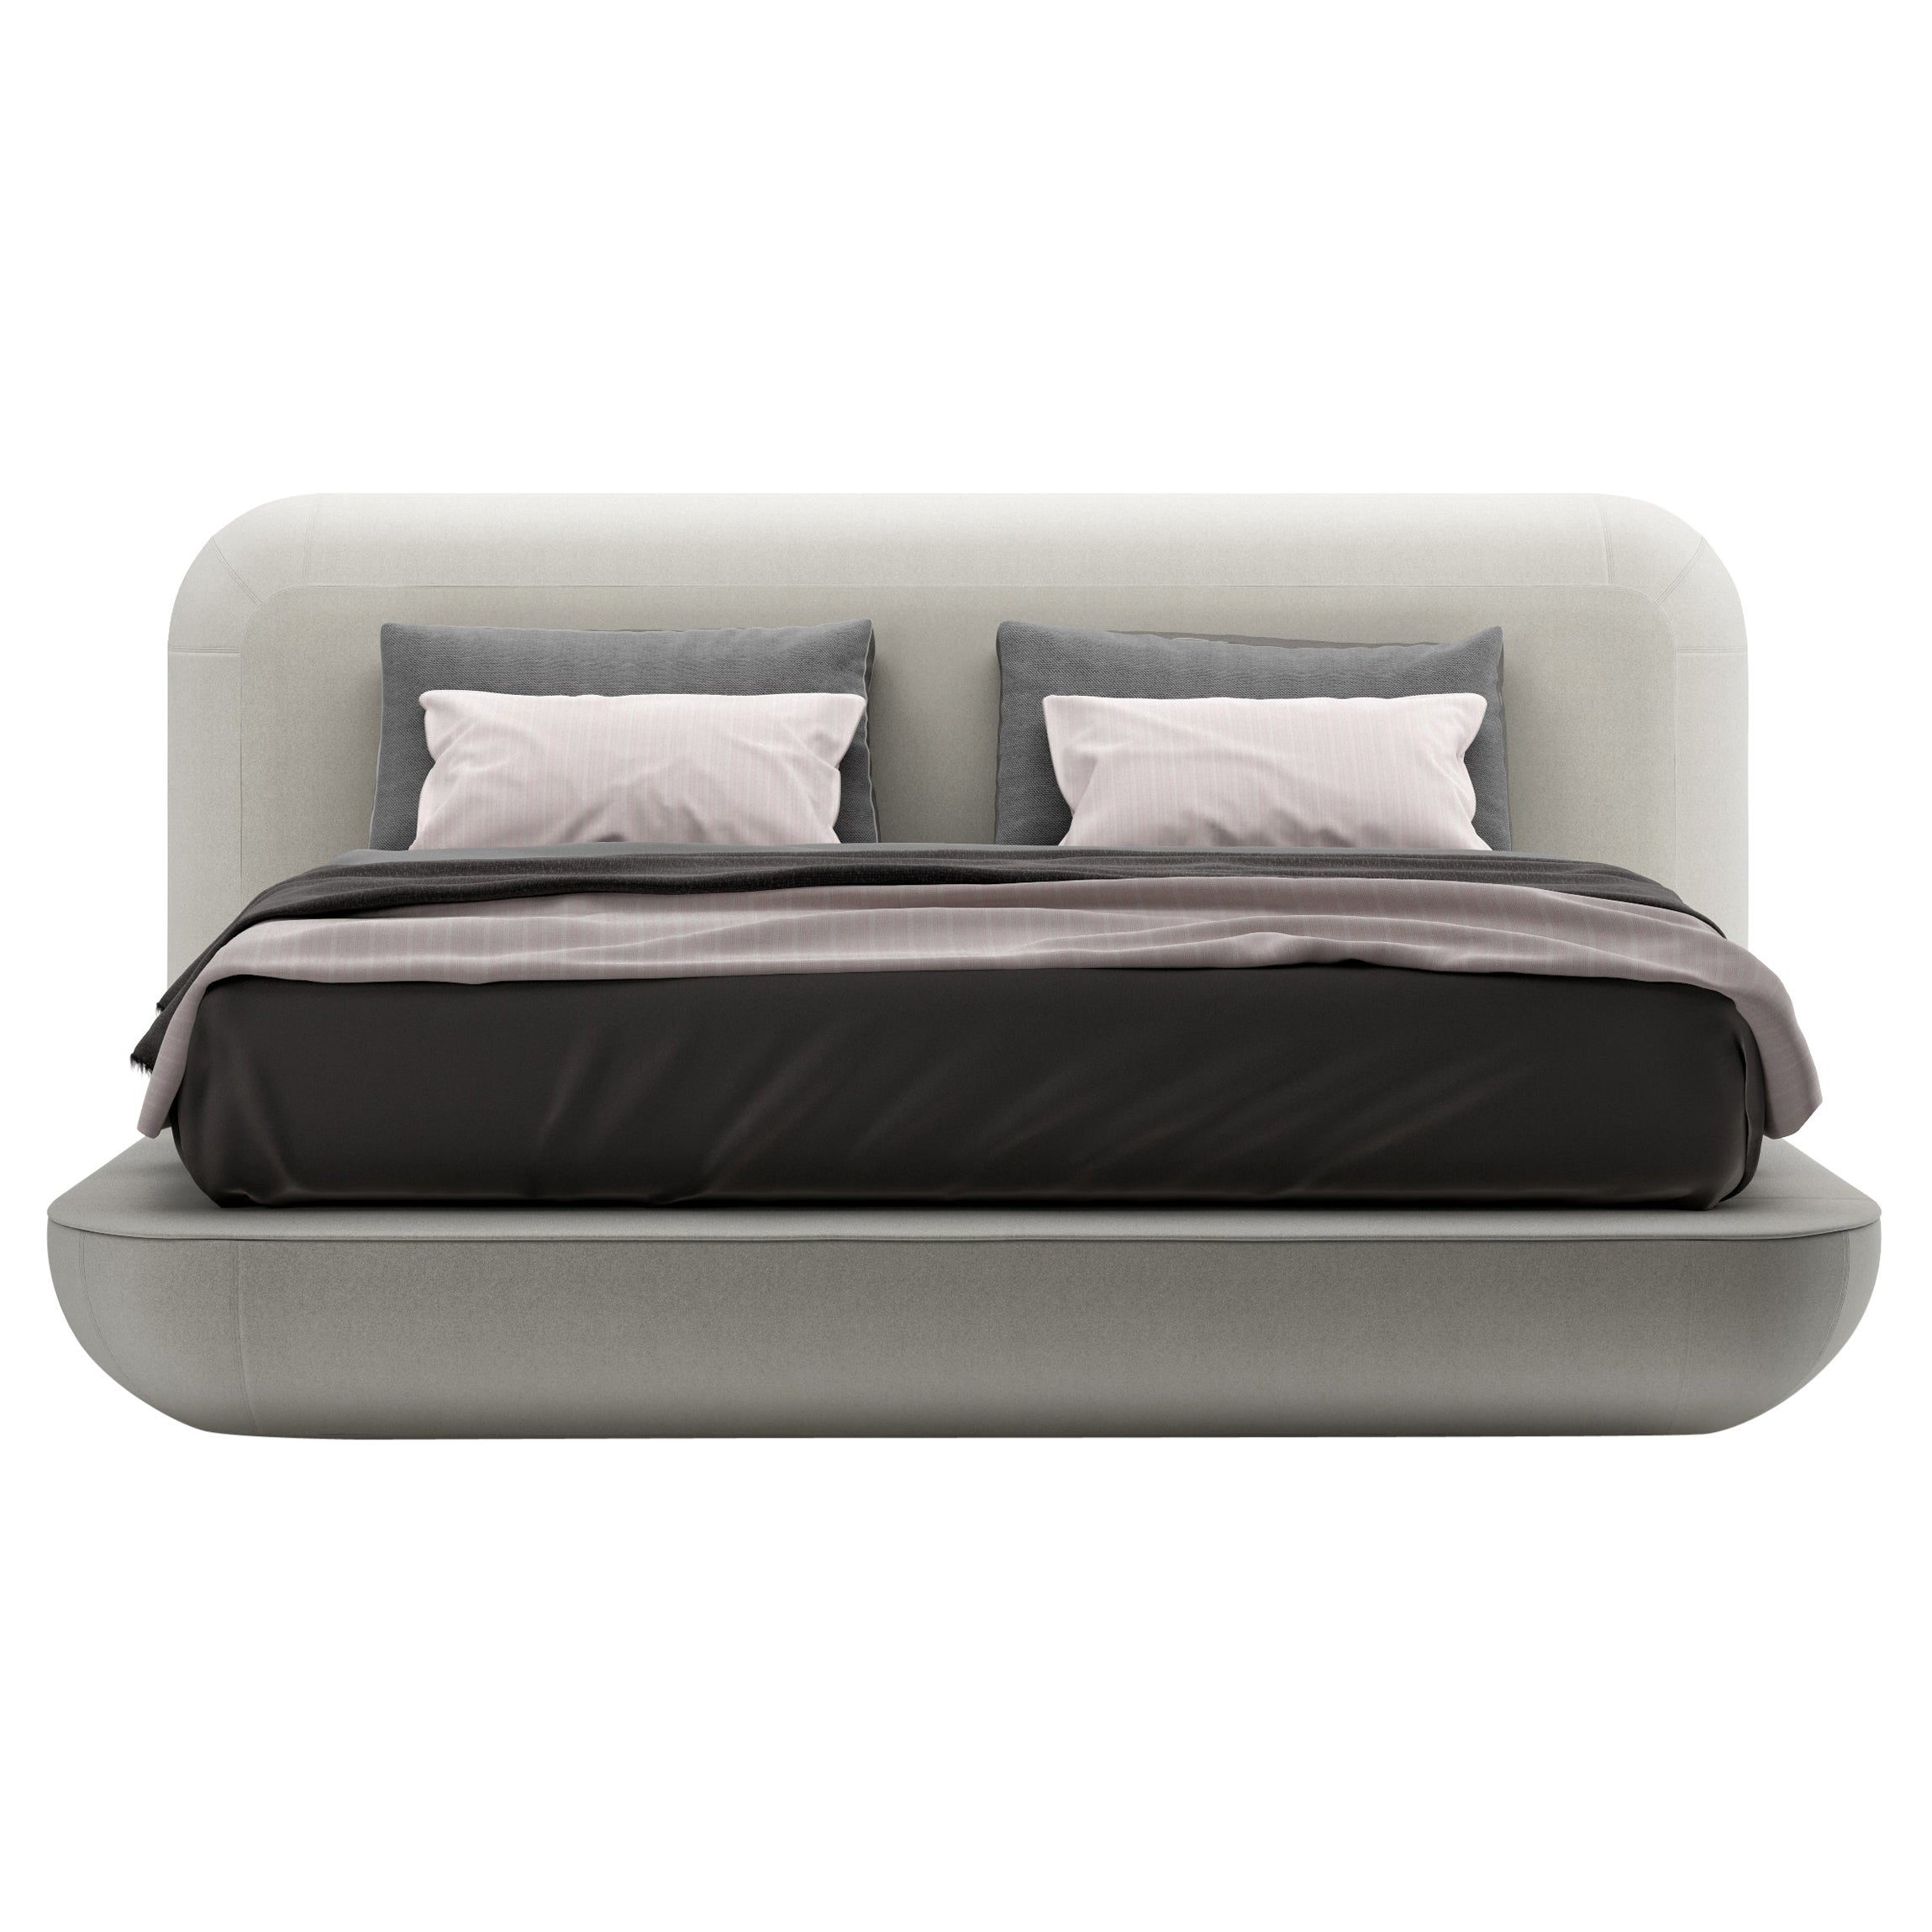 Alias 28A Medium Okome Bed with Headboard Upholstered in White by Nendo